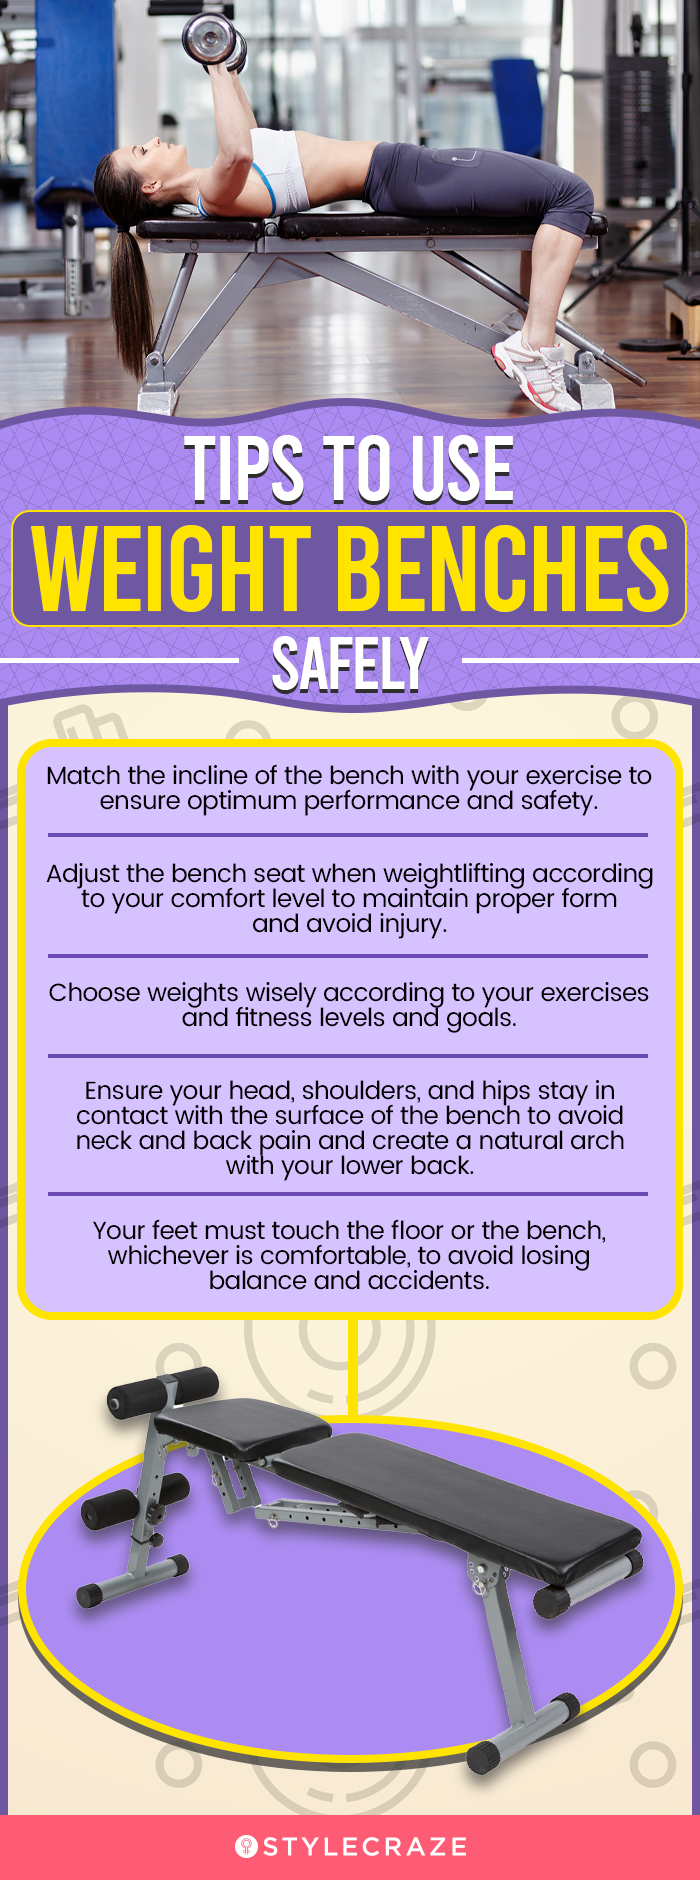 Tips To Use Weight Benches Safely (infographic)